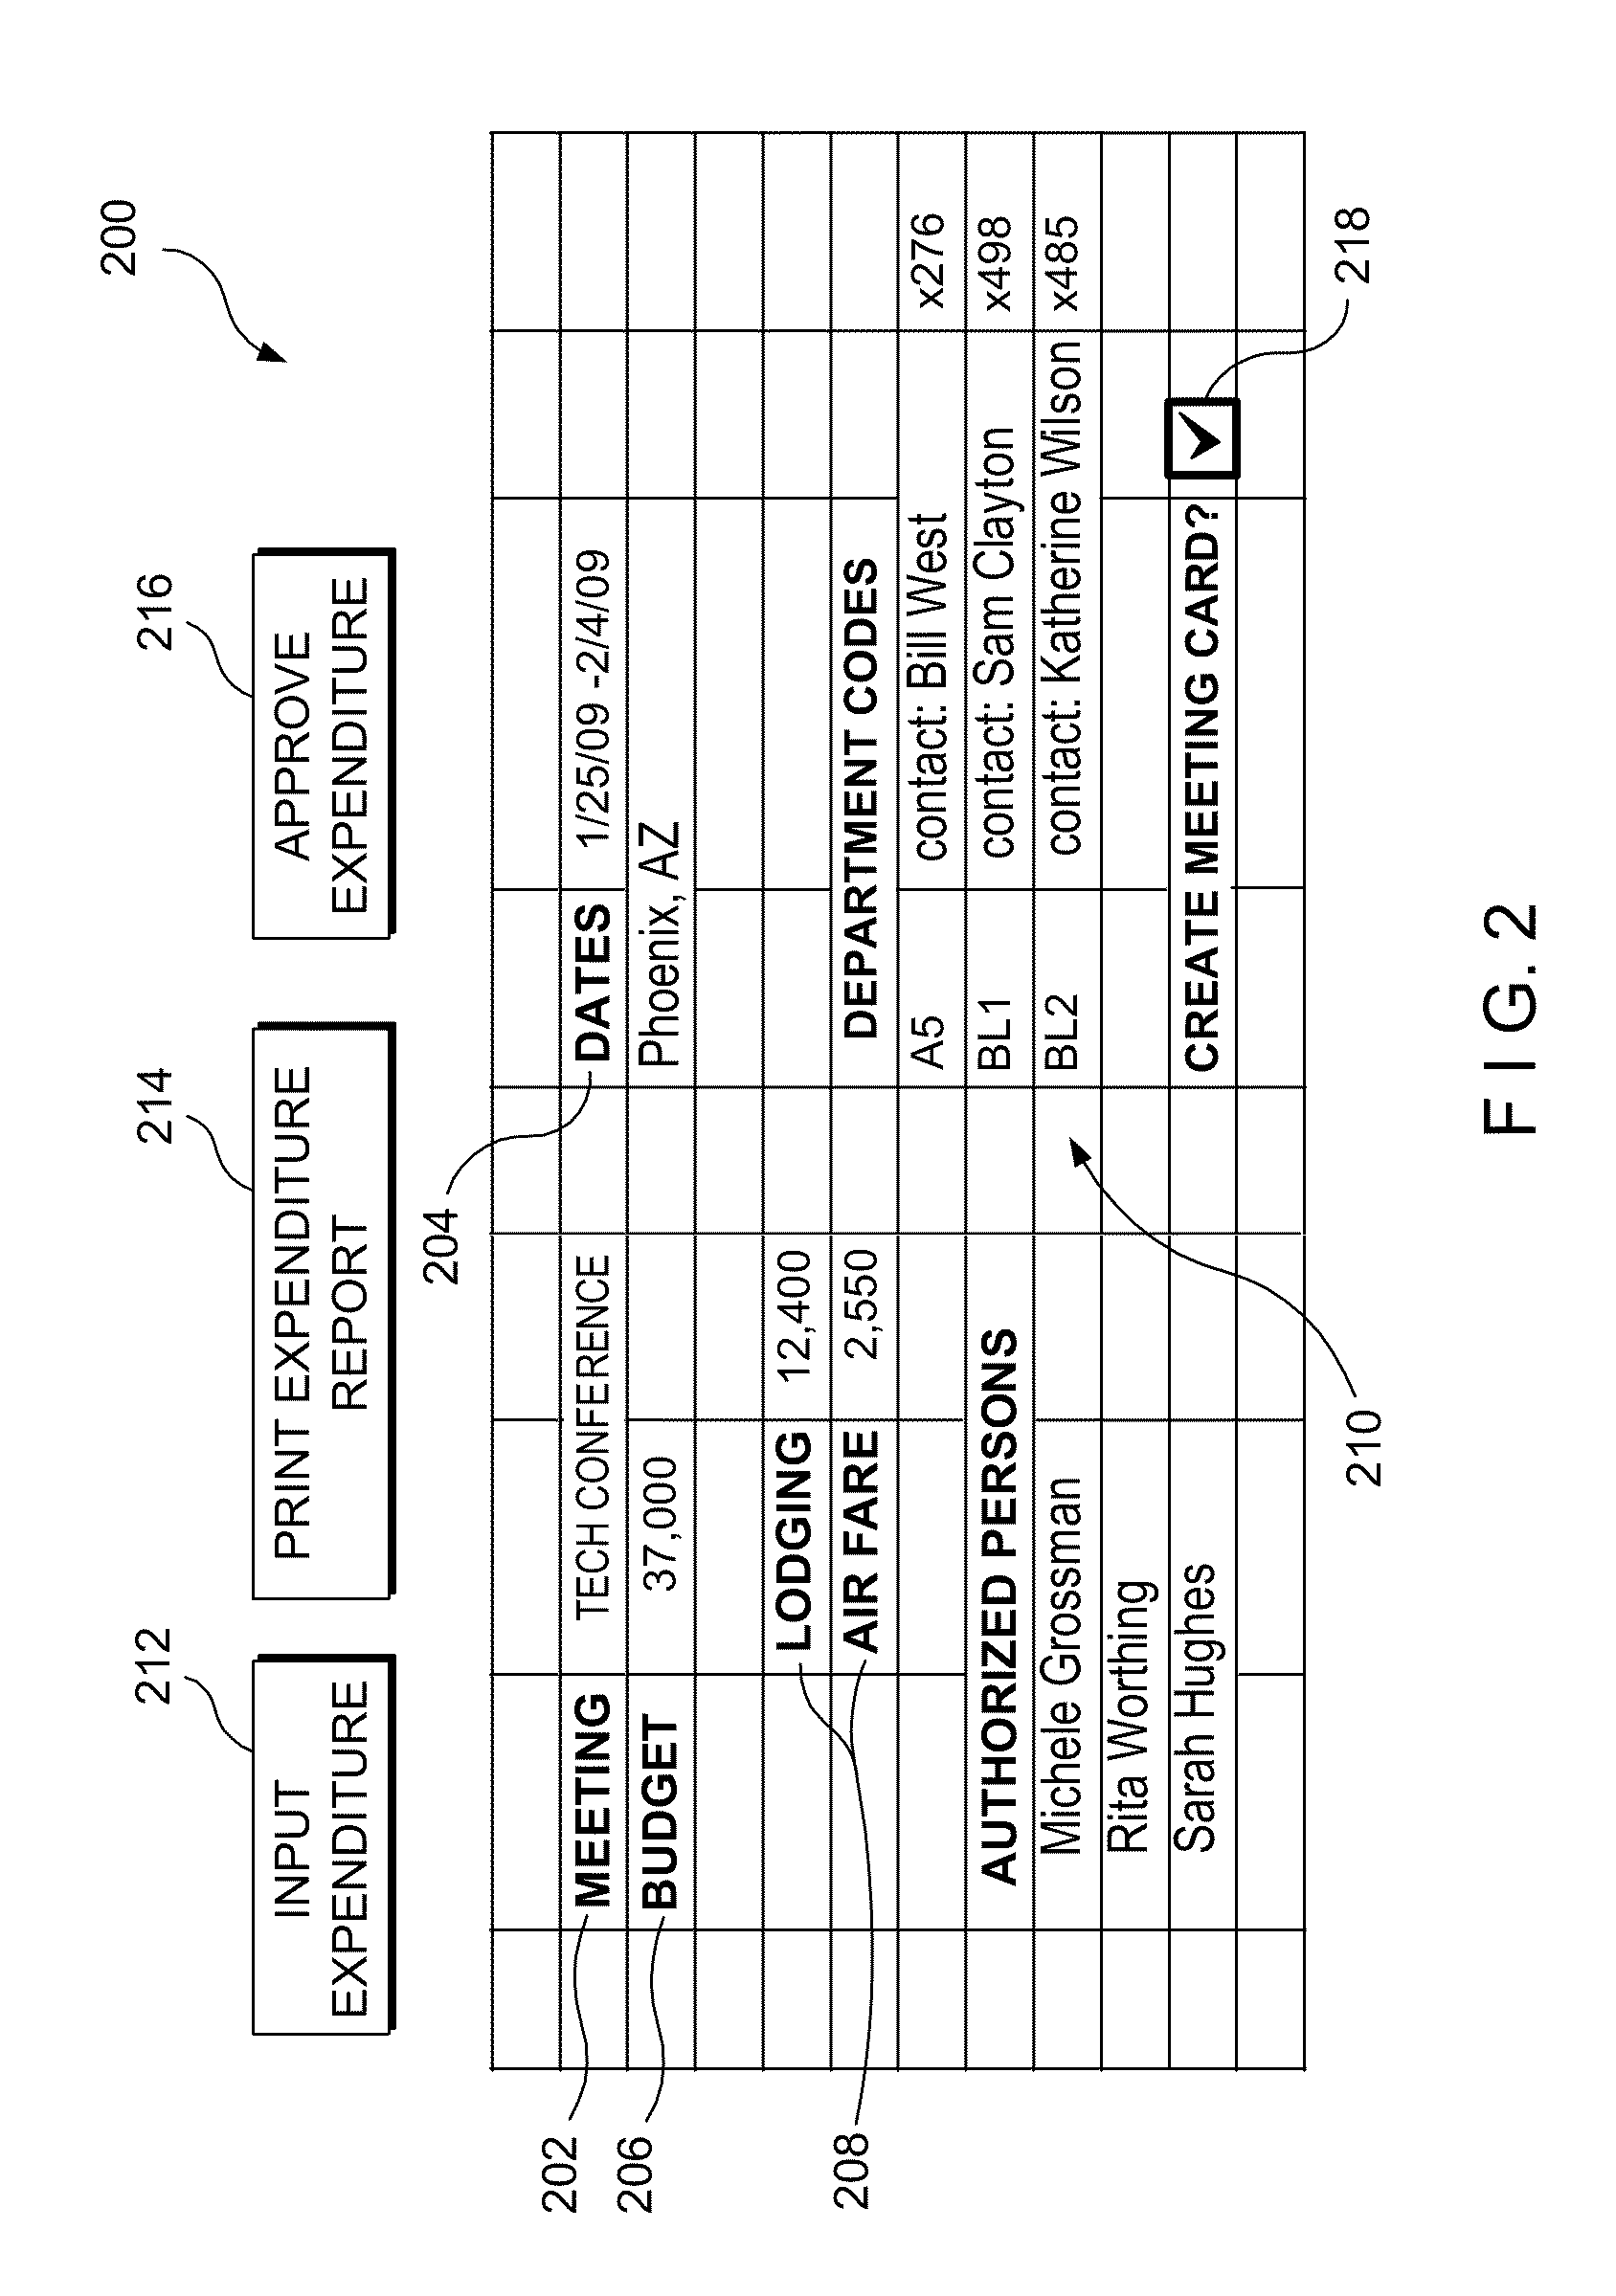 System and Method for Managing Issuance of Financial Accounts